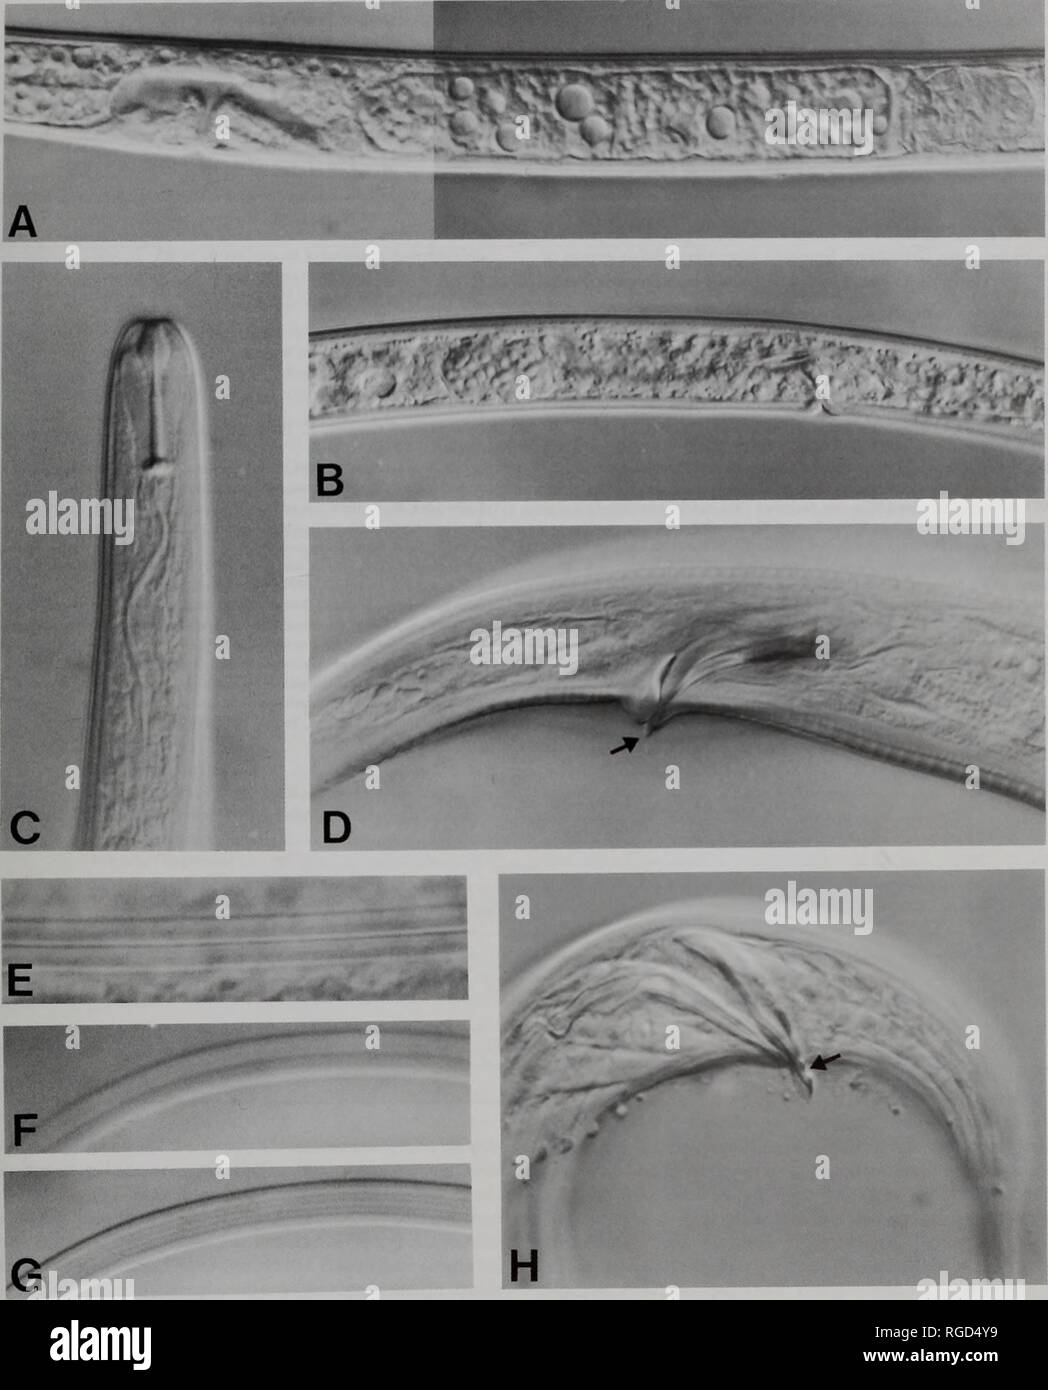 . Bulletin of the Natural History Museum Zoology. FRESHWATER NEMATODES FROM LOCH NESS 23. Fig. 36 A, Lelenchus sp. female, posterior region of reproductive system. B, Lelenchus leptosoma (de Man, 1880) female, posterior region of reproductive system. C. Tylenchinae sp. female, head region. D, Tylenchus rex Andrassy 1979 male, spicular region showing spicate projection, arrowed. E-G, Eucephalobus oxyuroides (de Man. 1876). E, female 1, lateral field showing three lines. F, G, female 2, lateral field showing variation in number of lines depending on fine focus using light microscopy. H. Diplogas Stock Photo